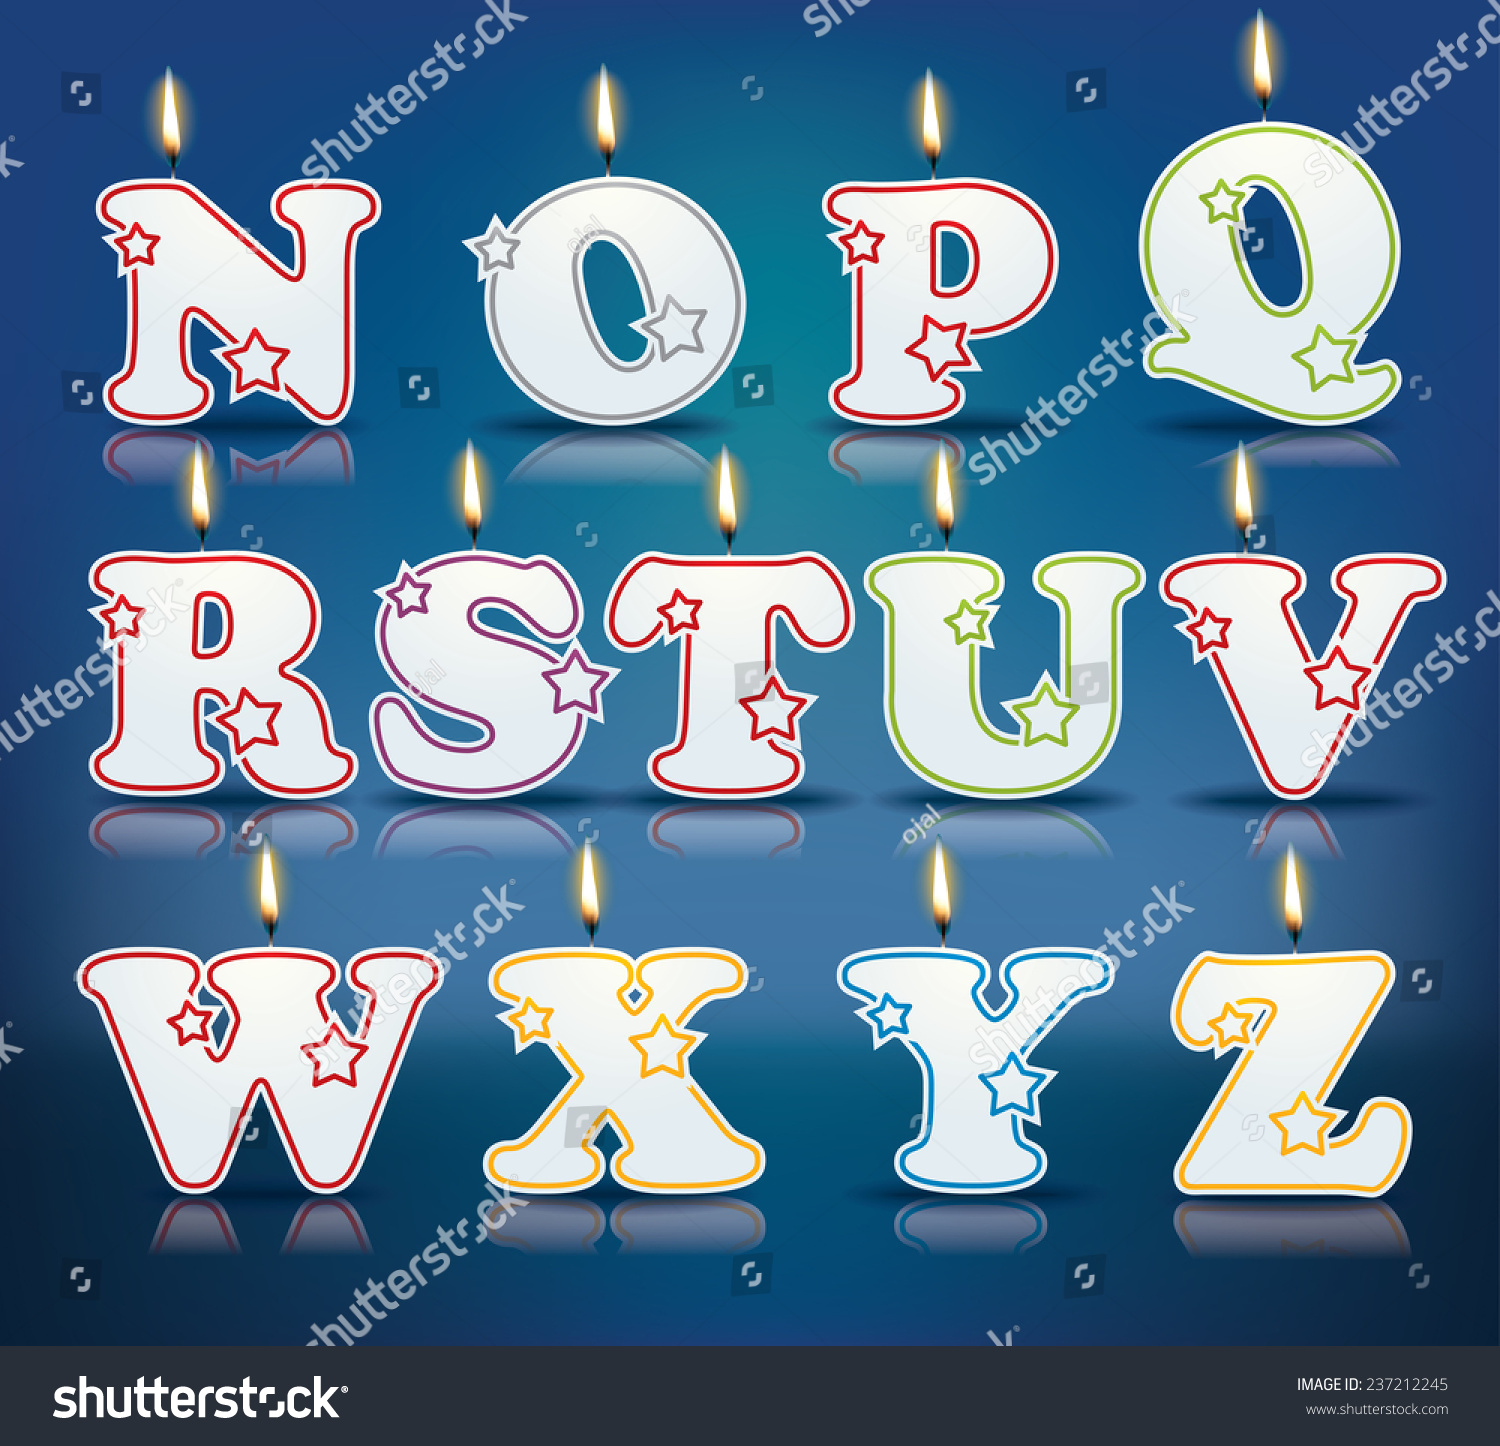 SVG of Candle letters from N to Z with flames - eps 10 vector illustration svg